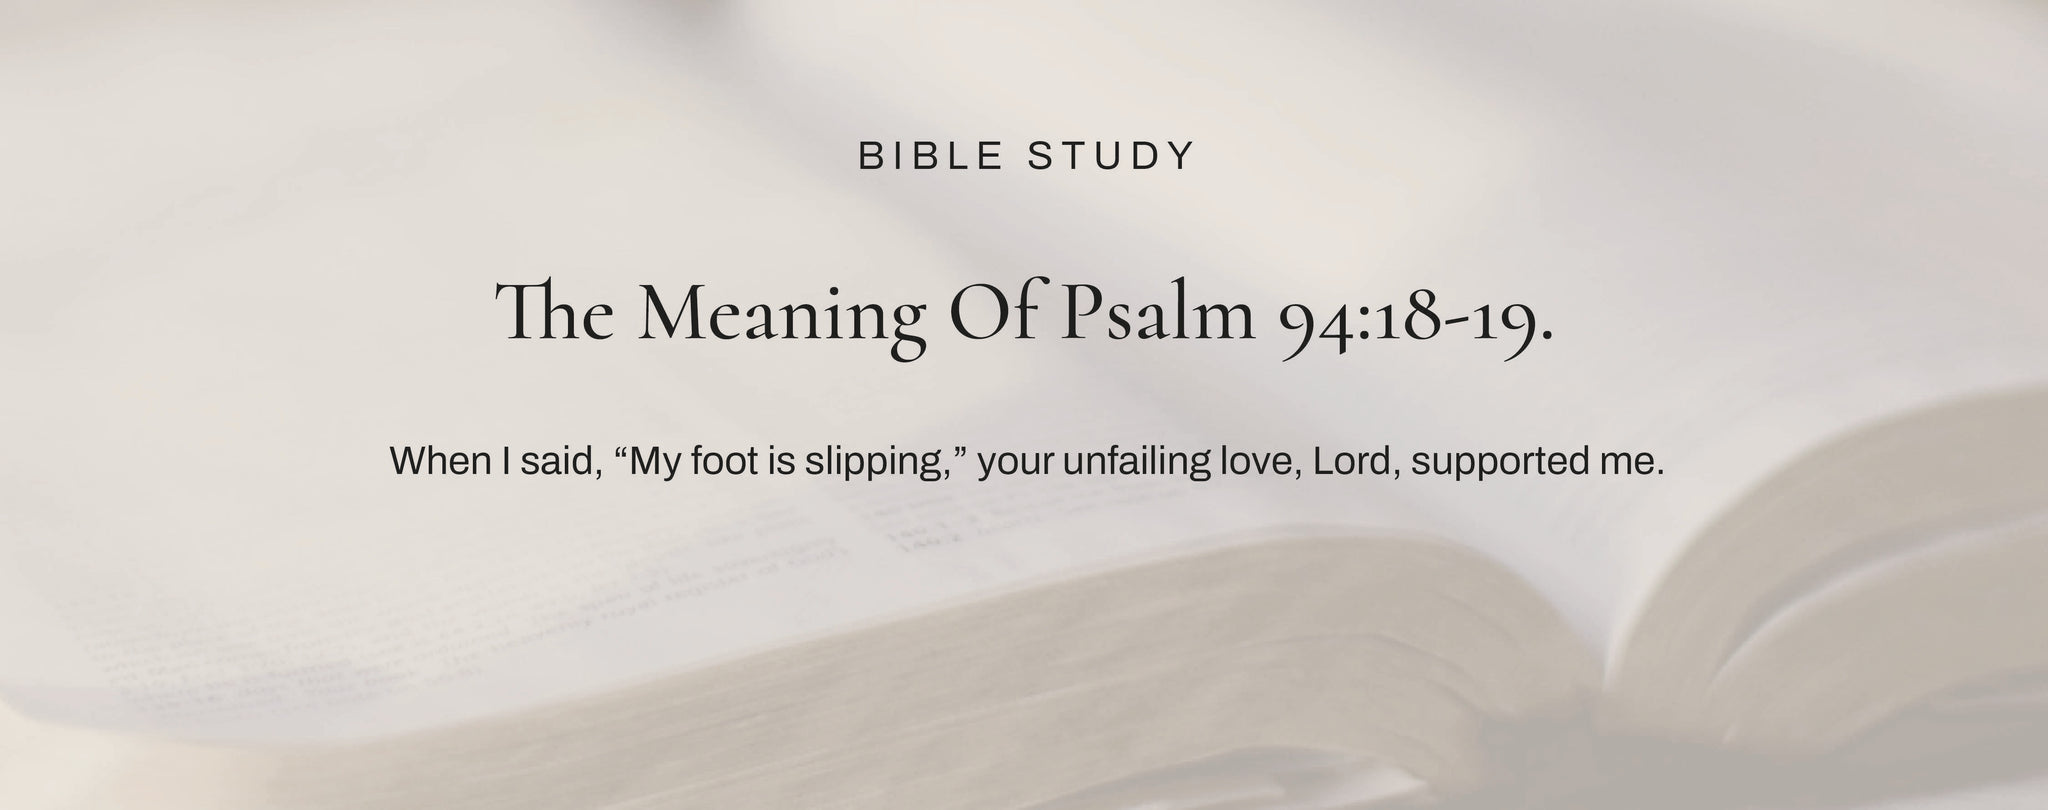 What Does Psalm 94:18-19 Mean?